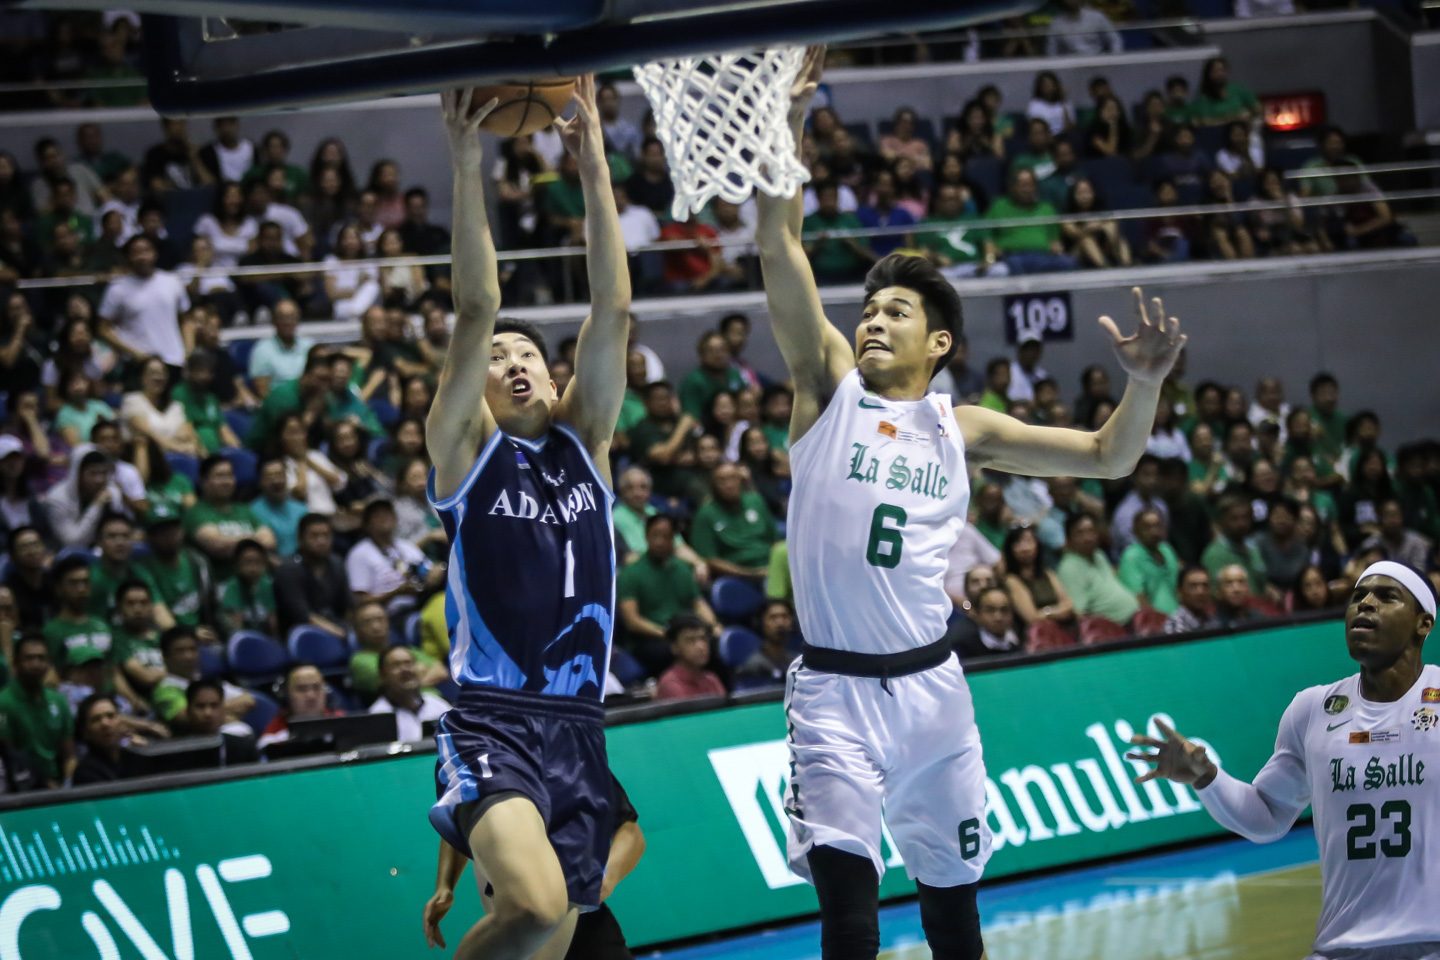 LOOK: Adamson University, UAAP board take action on ‘worst officiated’ game